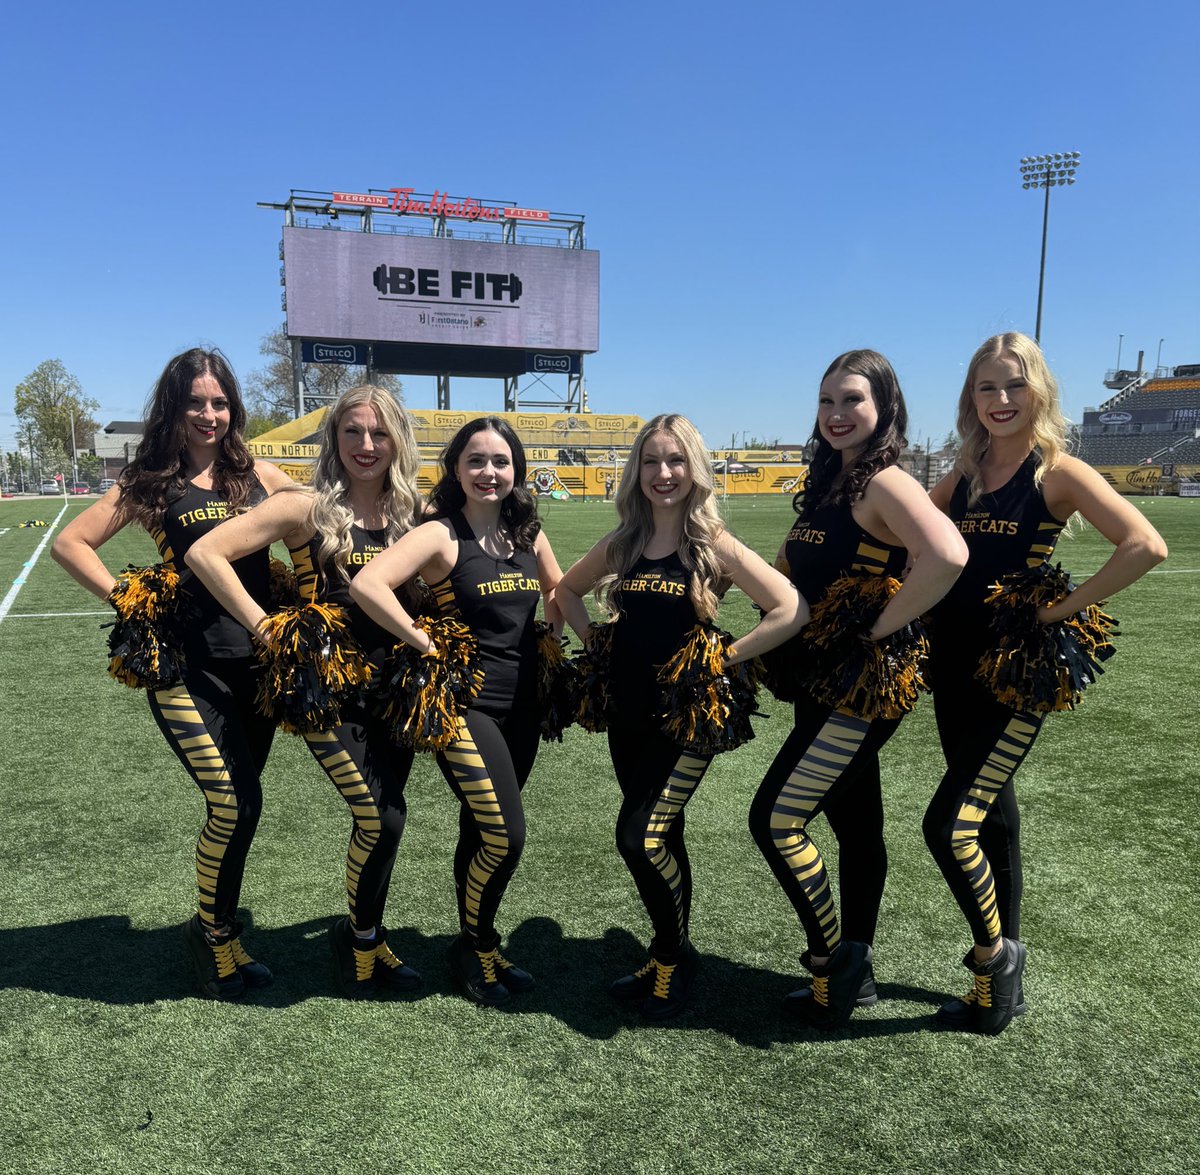 BeFit Day 💪

This initiative aims to ignite a passion for healthy, active living among youth, fostering positive habits + choices for their overall wellbeing 💛

TDC had fun leading a Dance & Cheer session with all the participants on #TimHortonsField 🏟️ 

#OskeeWeeWee | #Ticats